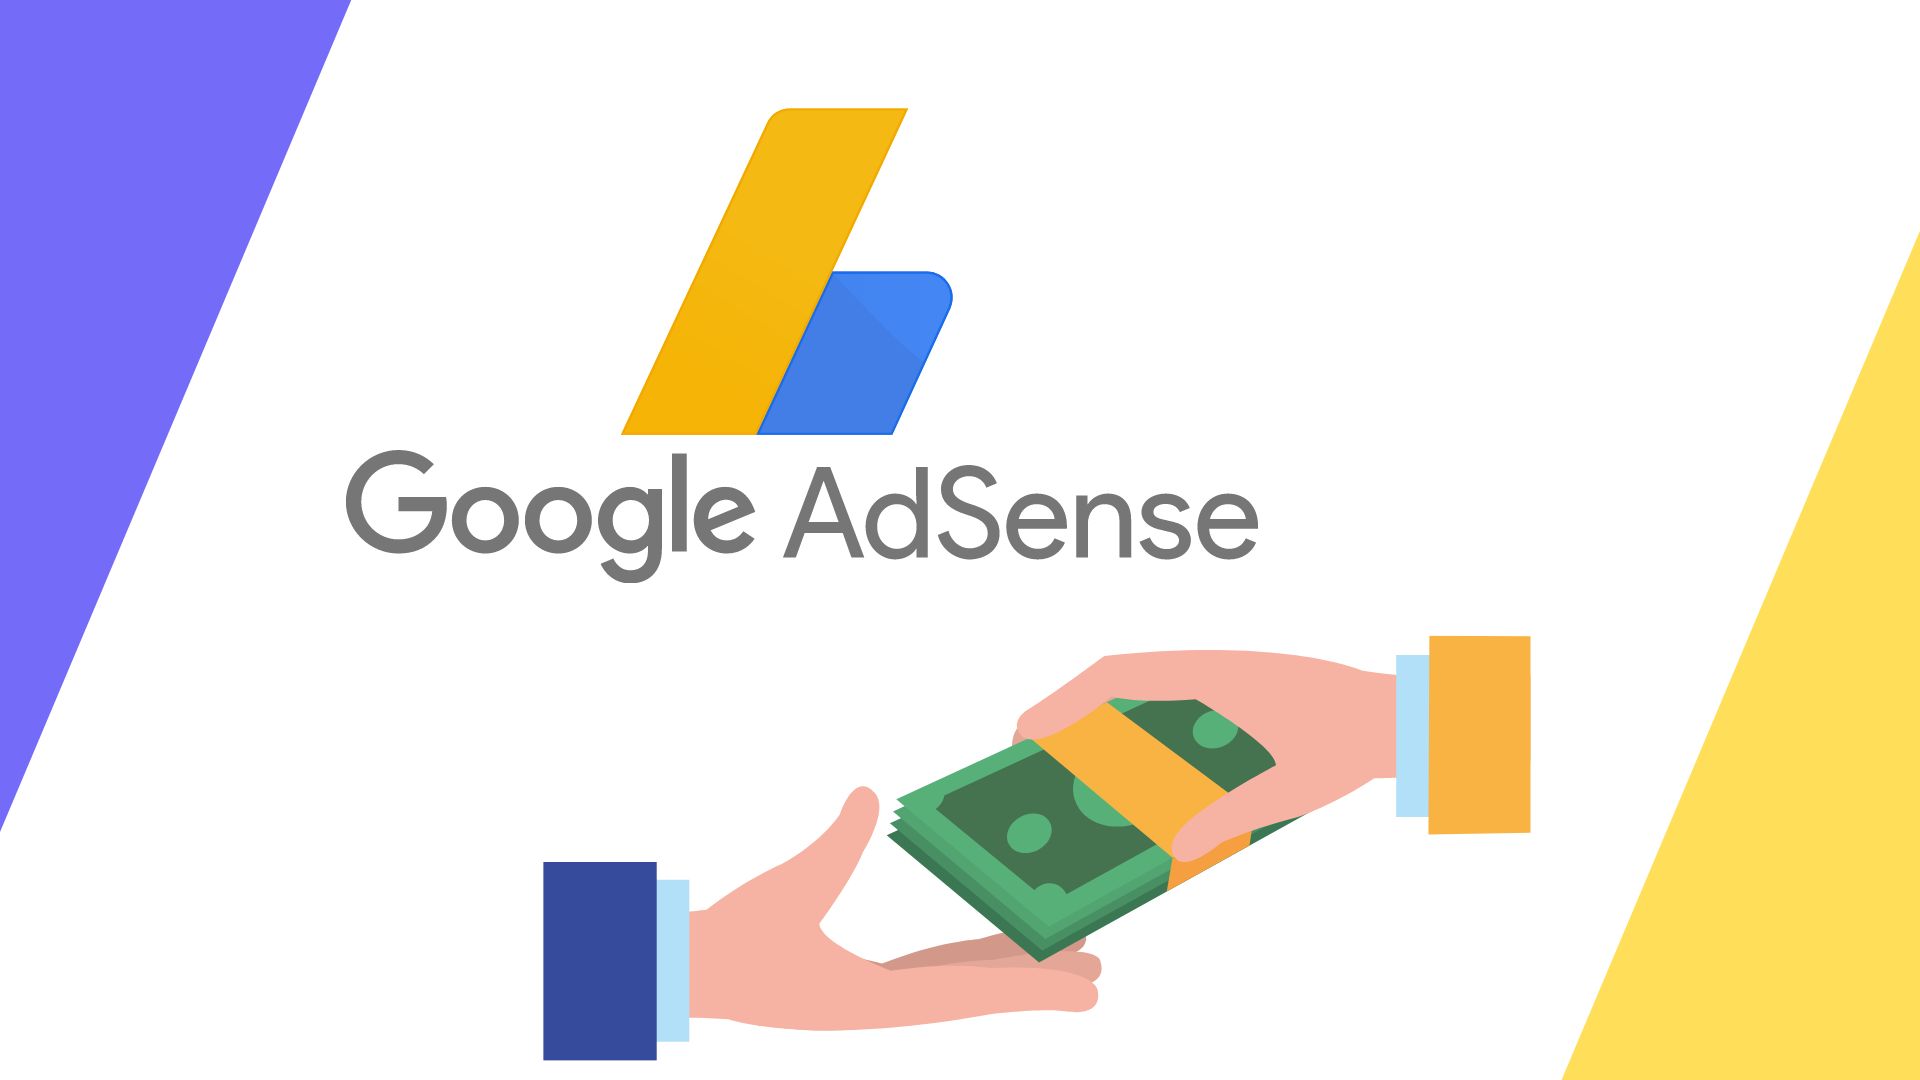 Google AdSense Payment Account Cancelled? Here's What To Do Next